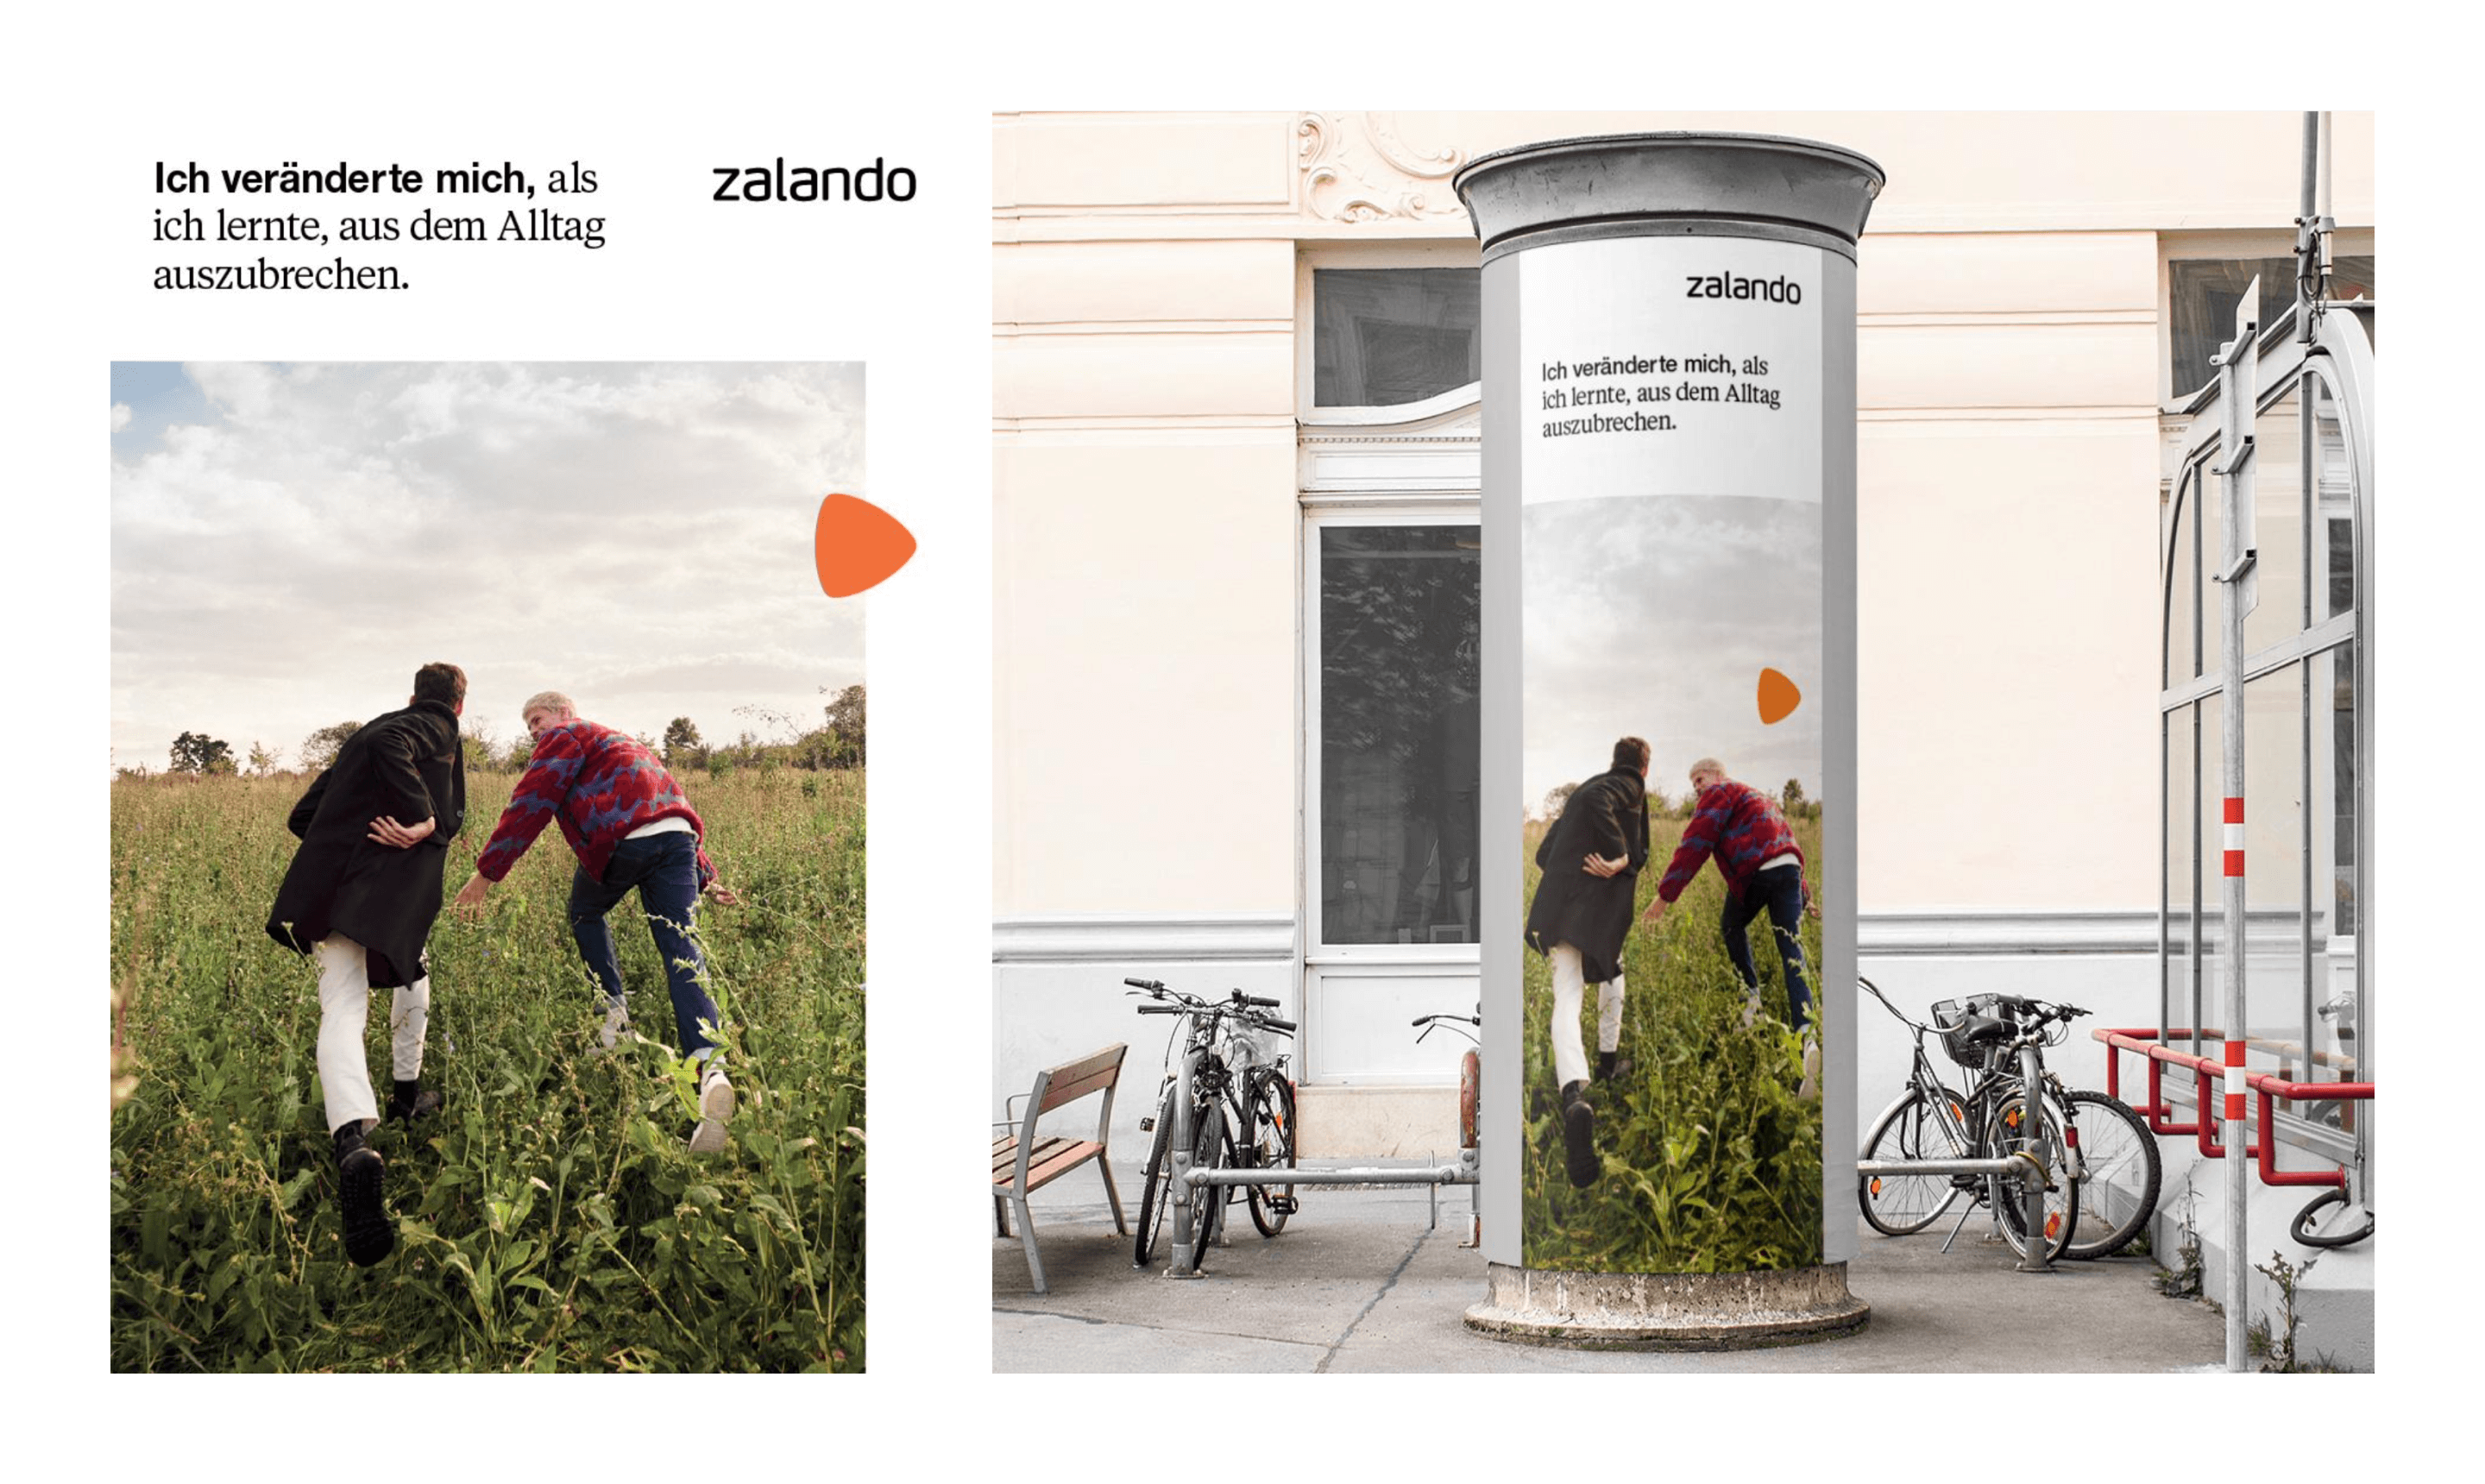 Application of the type pairing on OoH. Design by Zalando's MS&C team